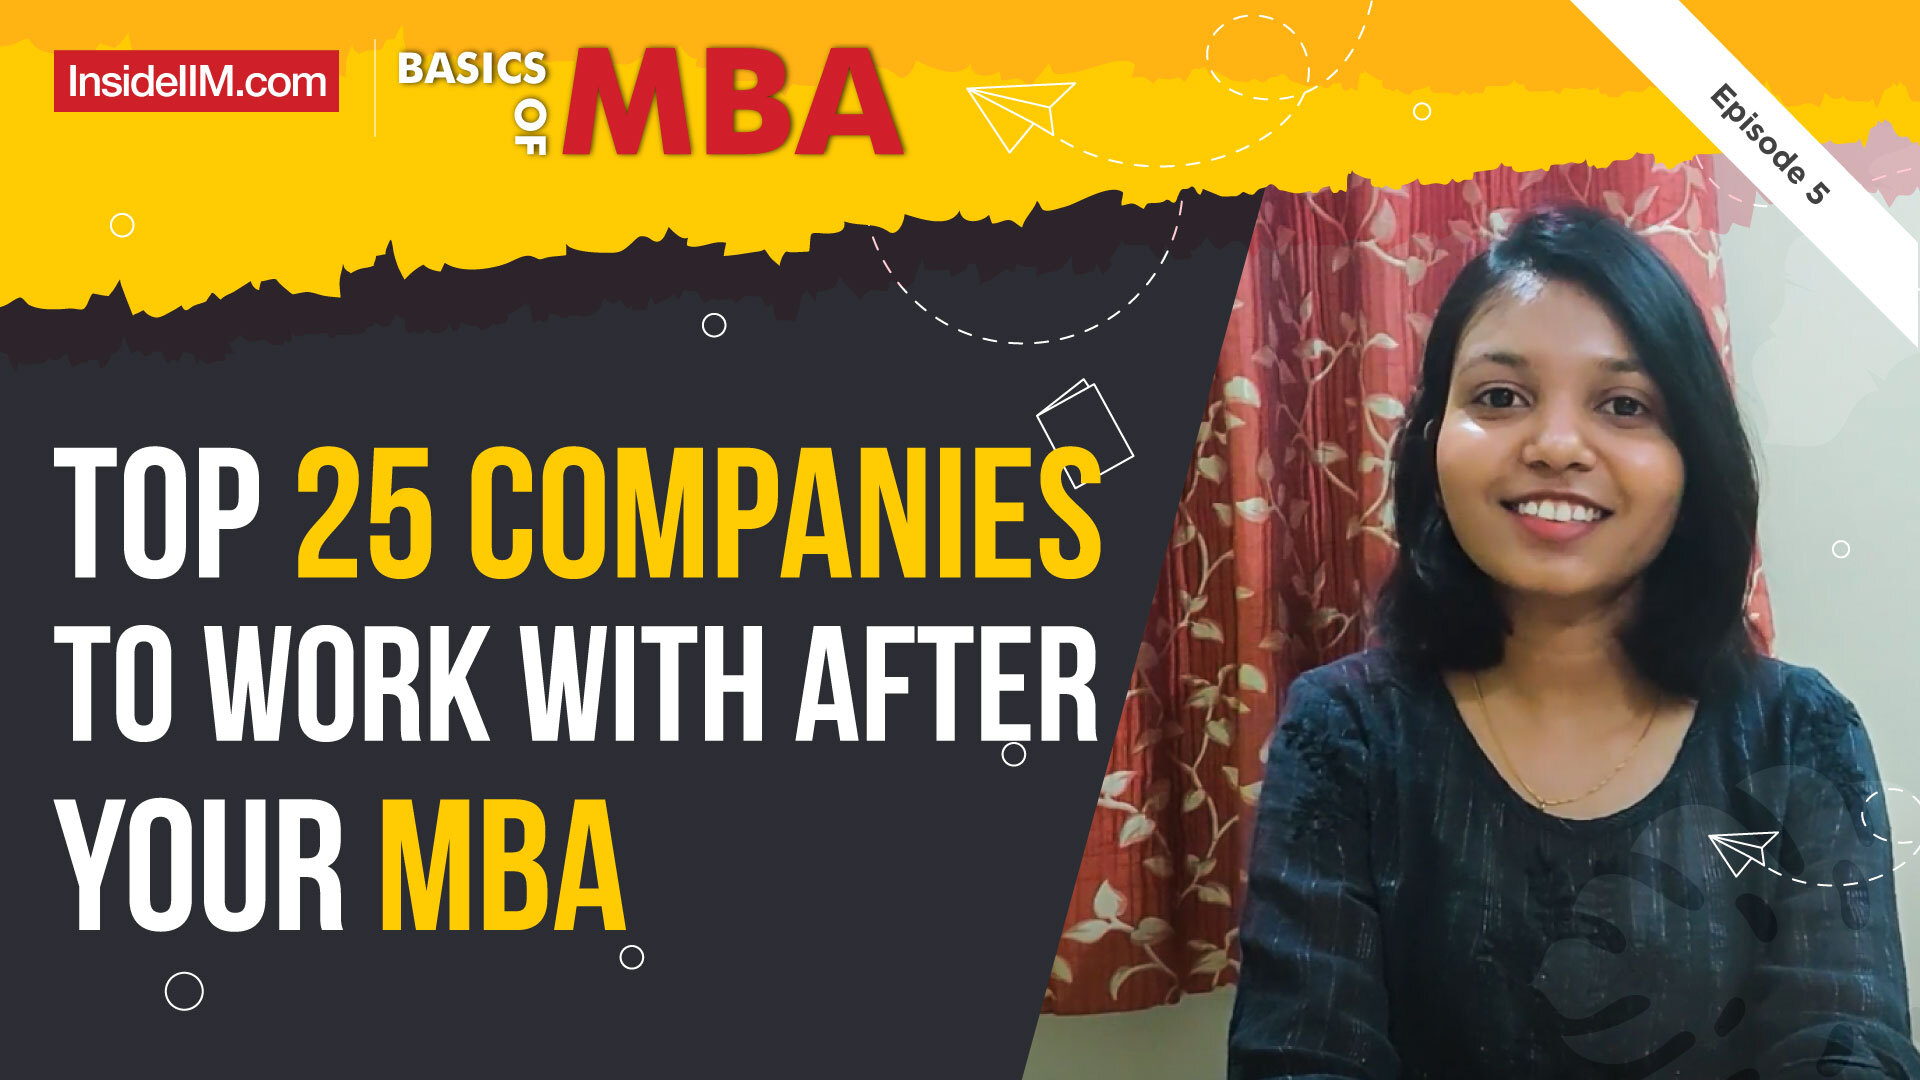 Google, Unilever & Other Top 25 Companies To Work With After MBA